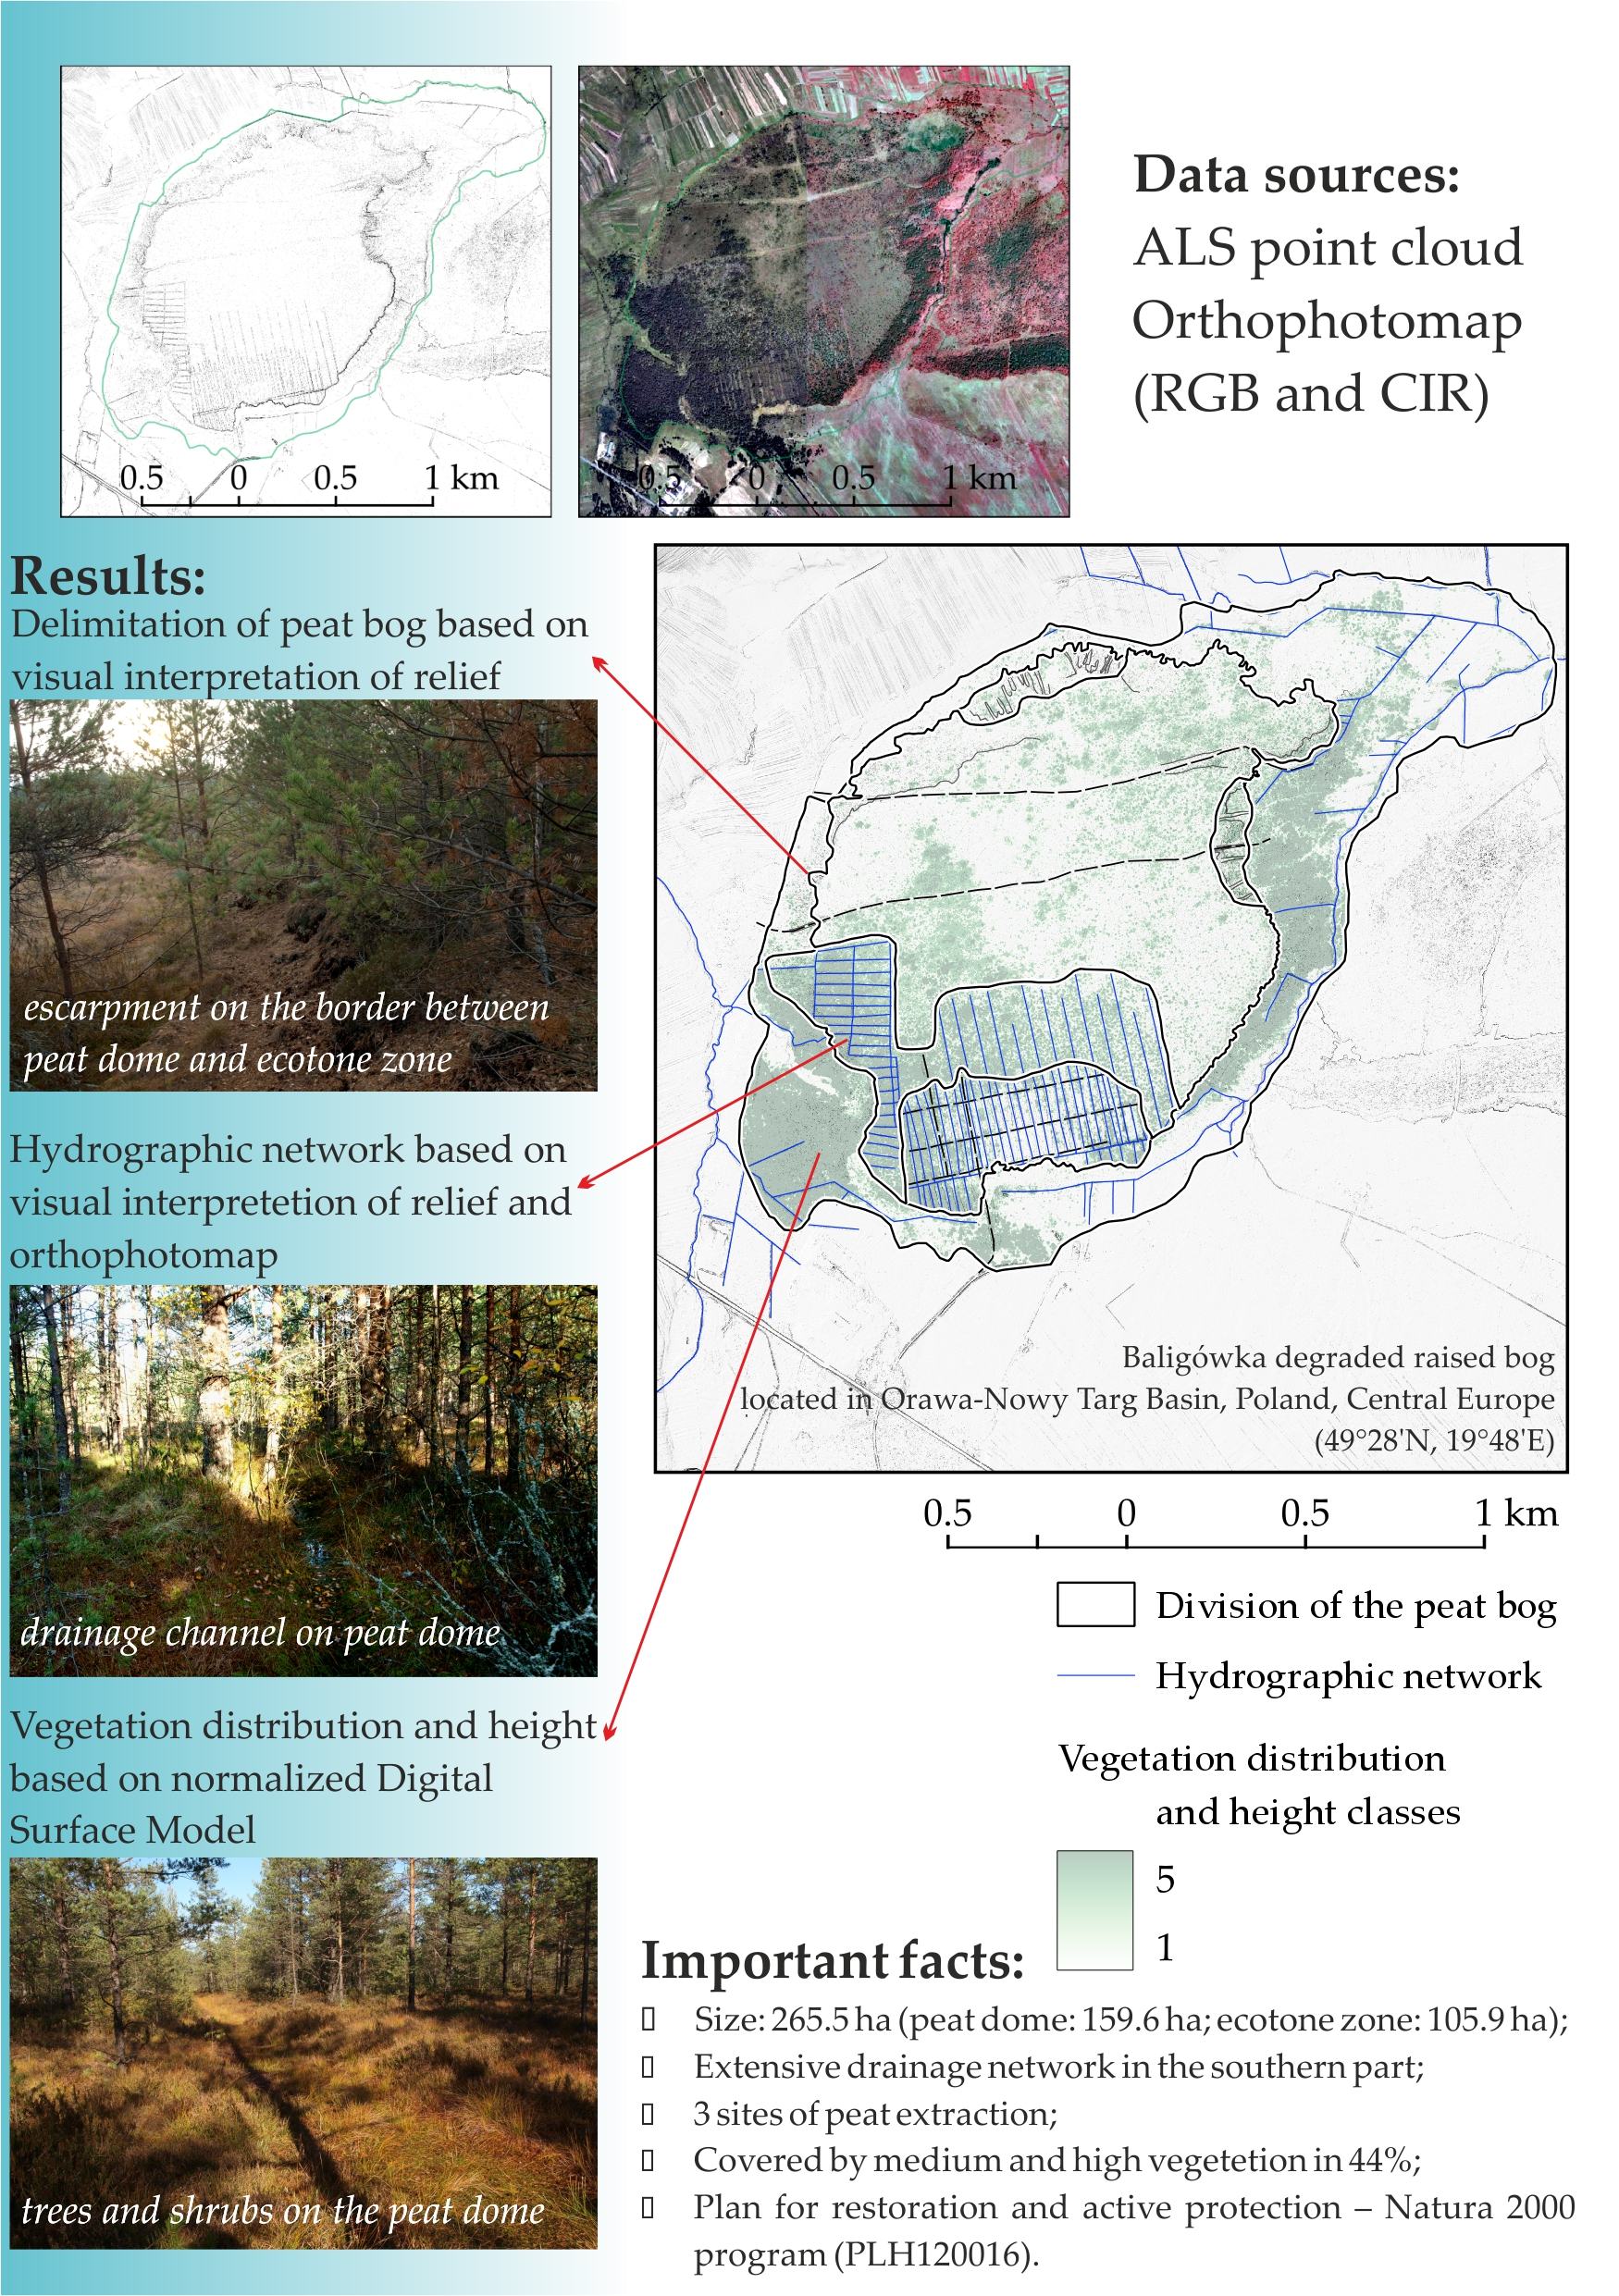 Remote Sensing | Free Full-Text | Assessment of Peat Extraction Range and  Vegetation Succession on the Baligówka Degraded Peat Bog (Central  Europe) Using the ALS Data and Orthophotomap